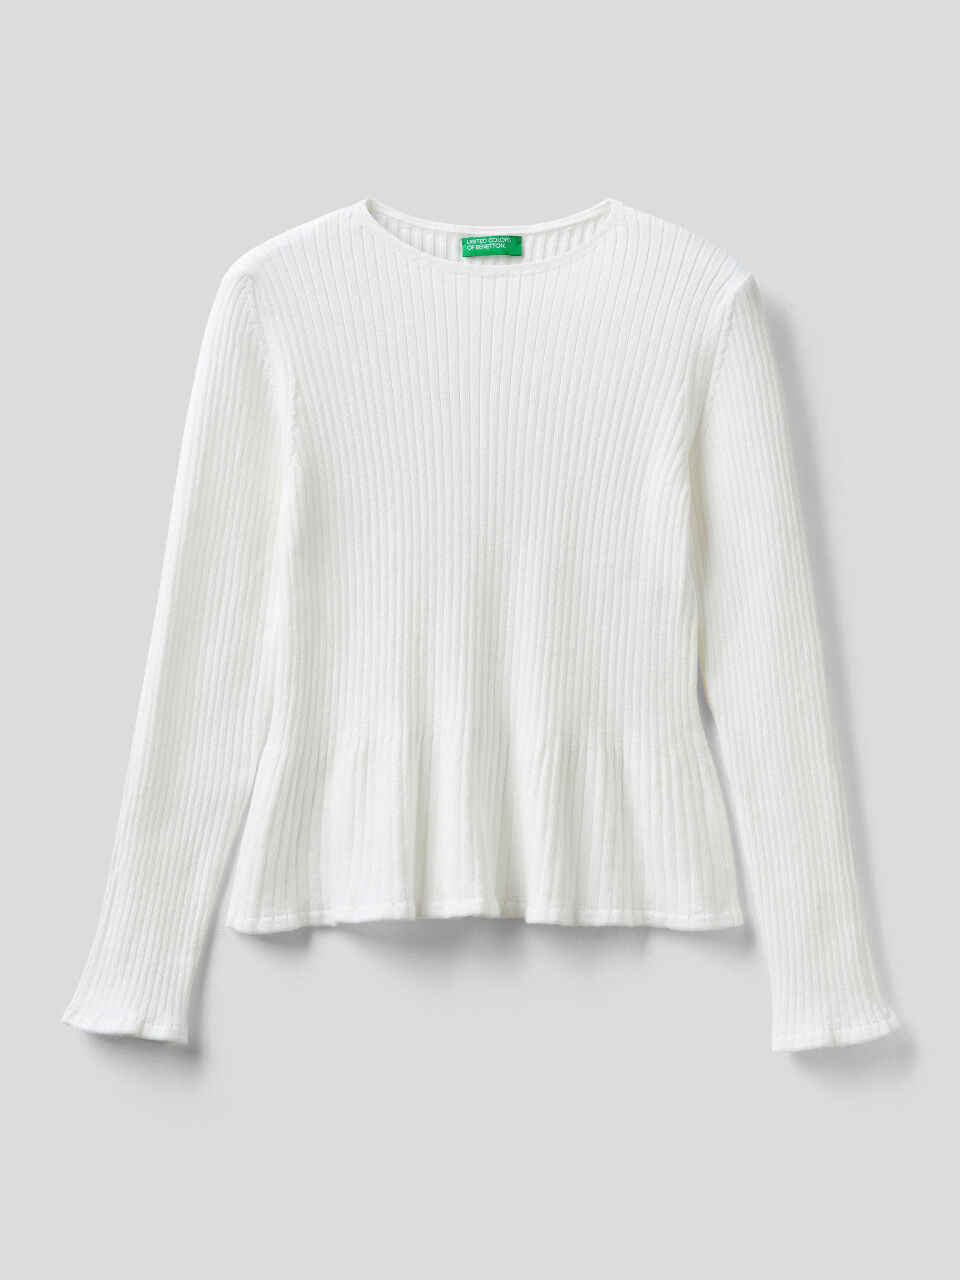 Junior Girls' Sweaters and Knitwear New Collection 2022 | Benetton